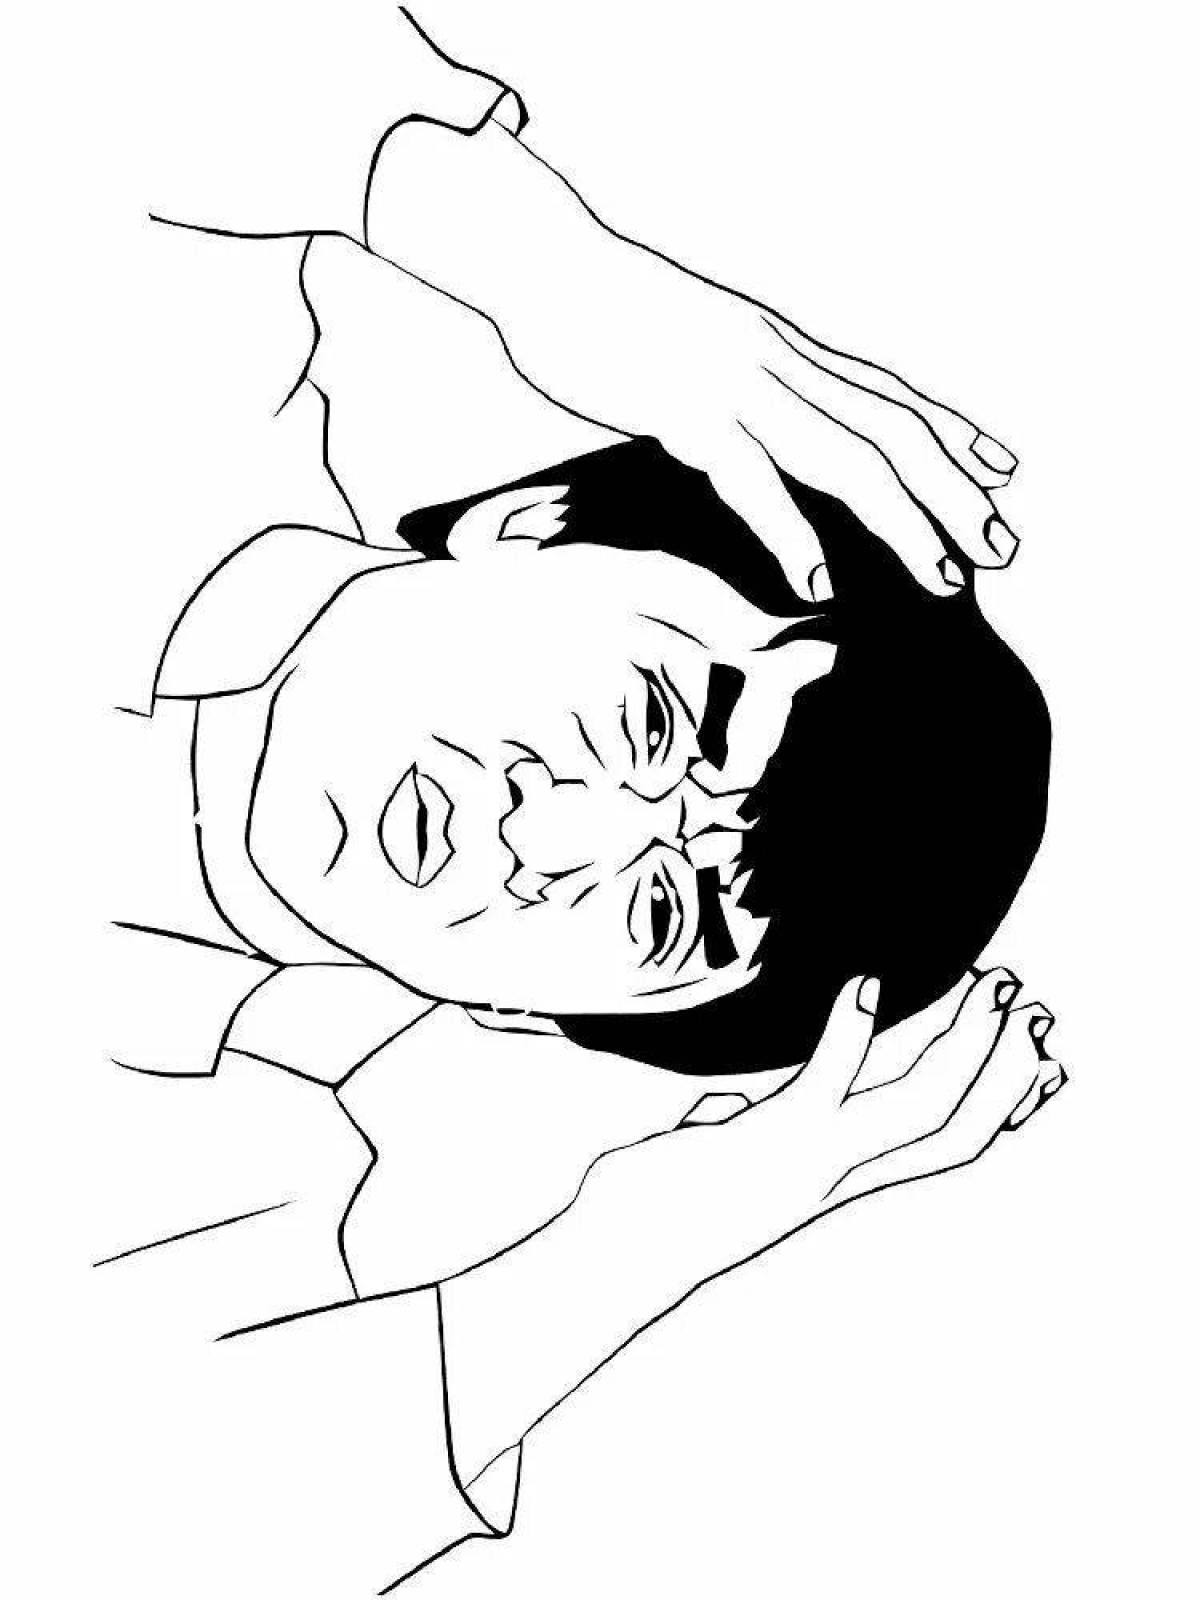 Jackie Chan's charming coloring book